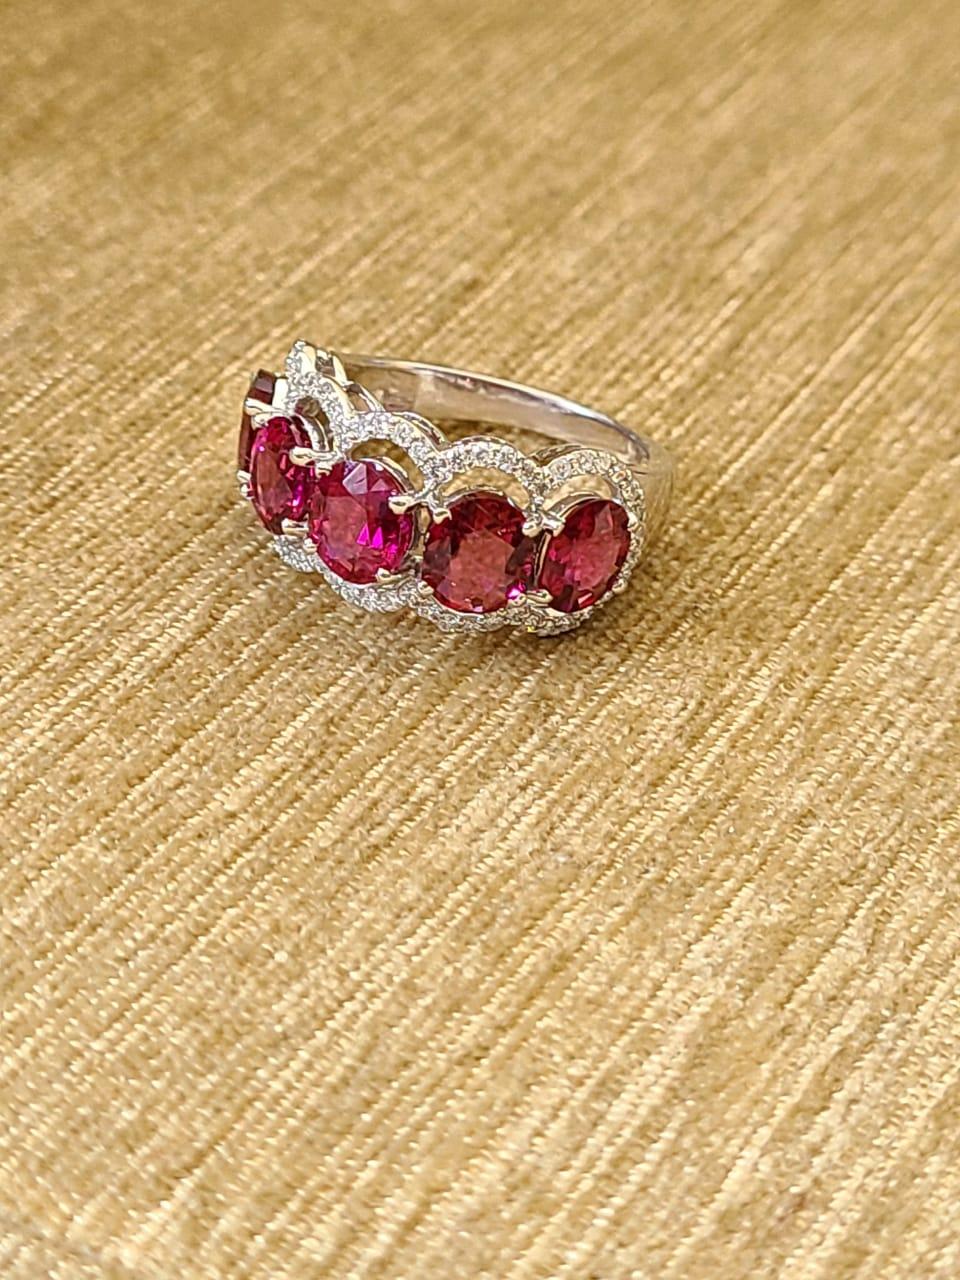 A very wearable Rubellite and Diamonds Band Ring set in 18K Gold & Diamonds. The weight of the Rubellite is 4.03 carats. The Rubellite is completely natural, without any treatment. The weight of the diamonds is 0.42 carats. The dimensions of the